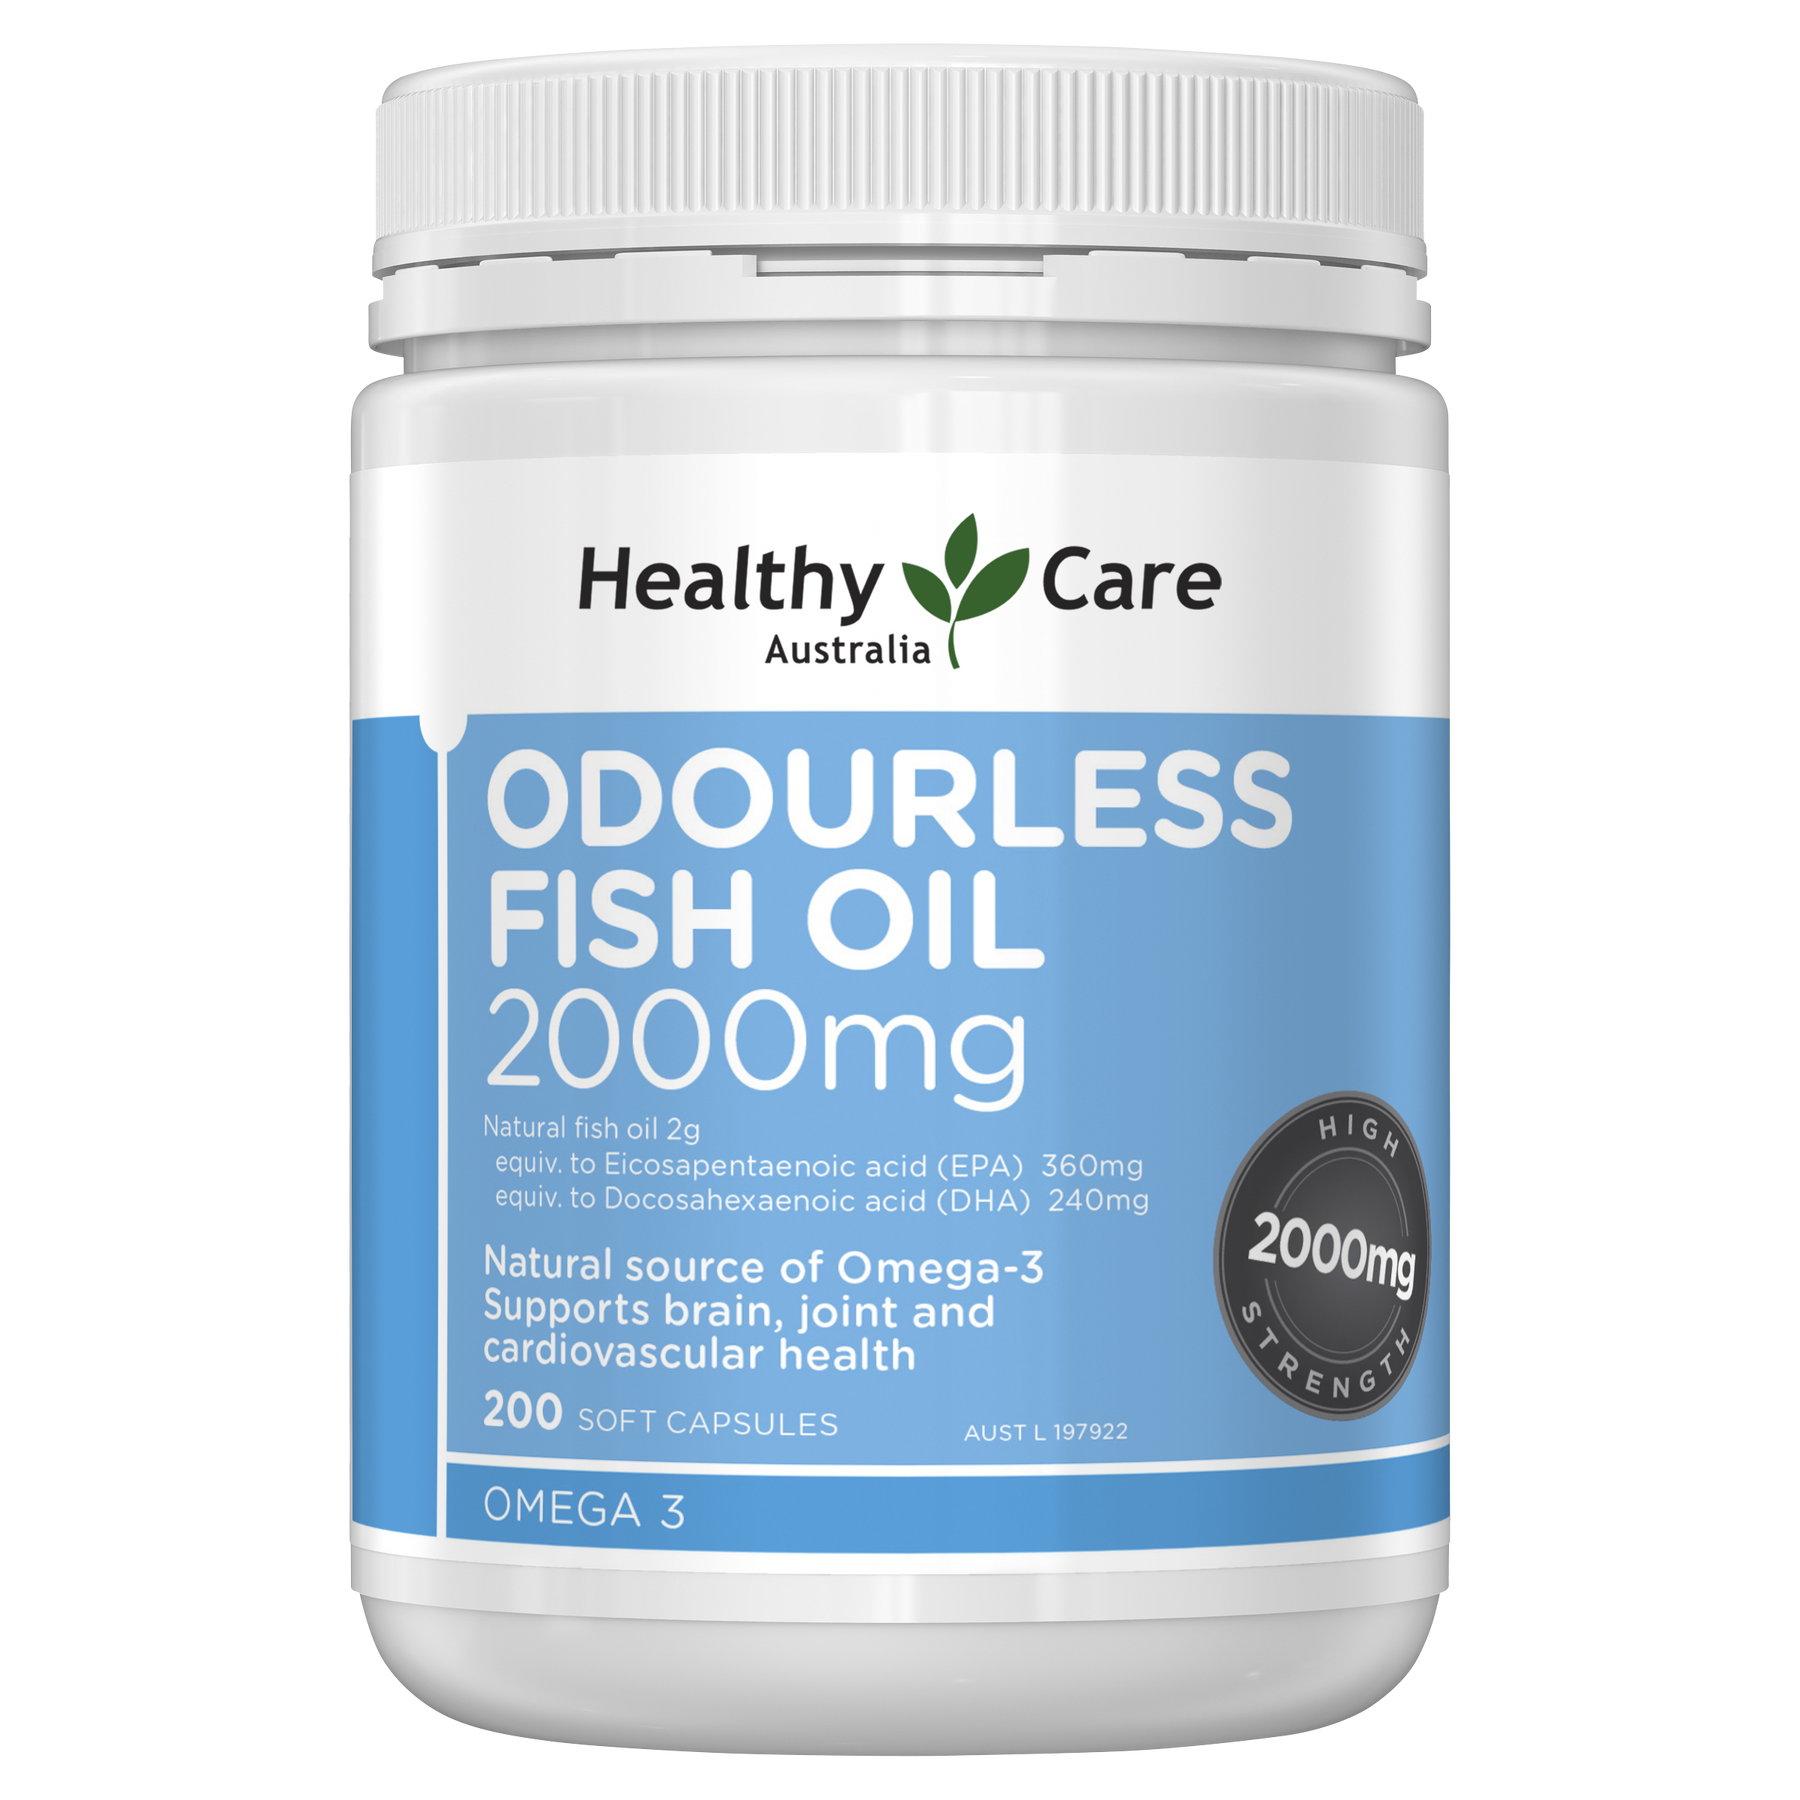 Healthy Care Odourless Fish Oil 2000mg - 200 Capsules